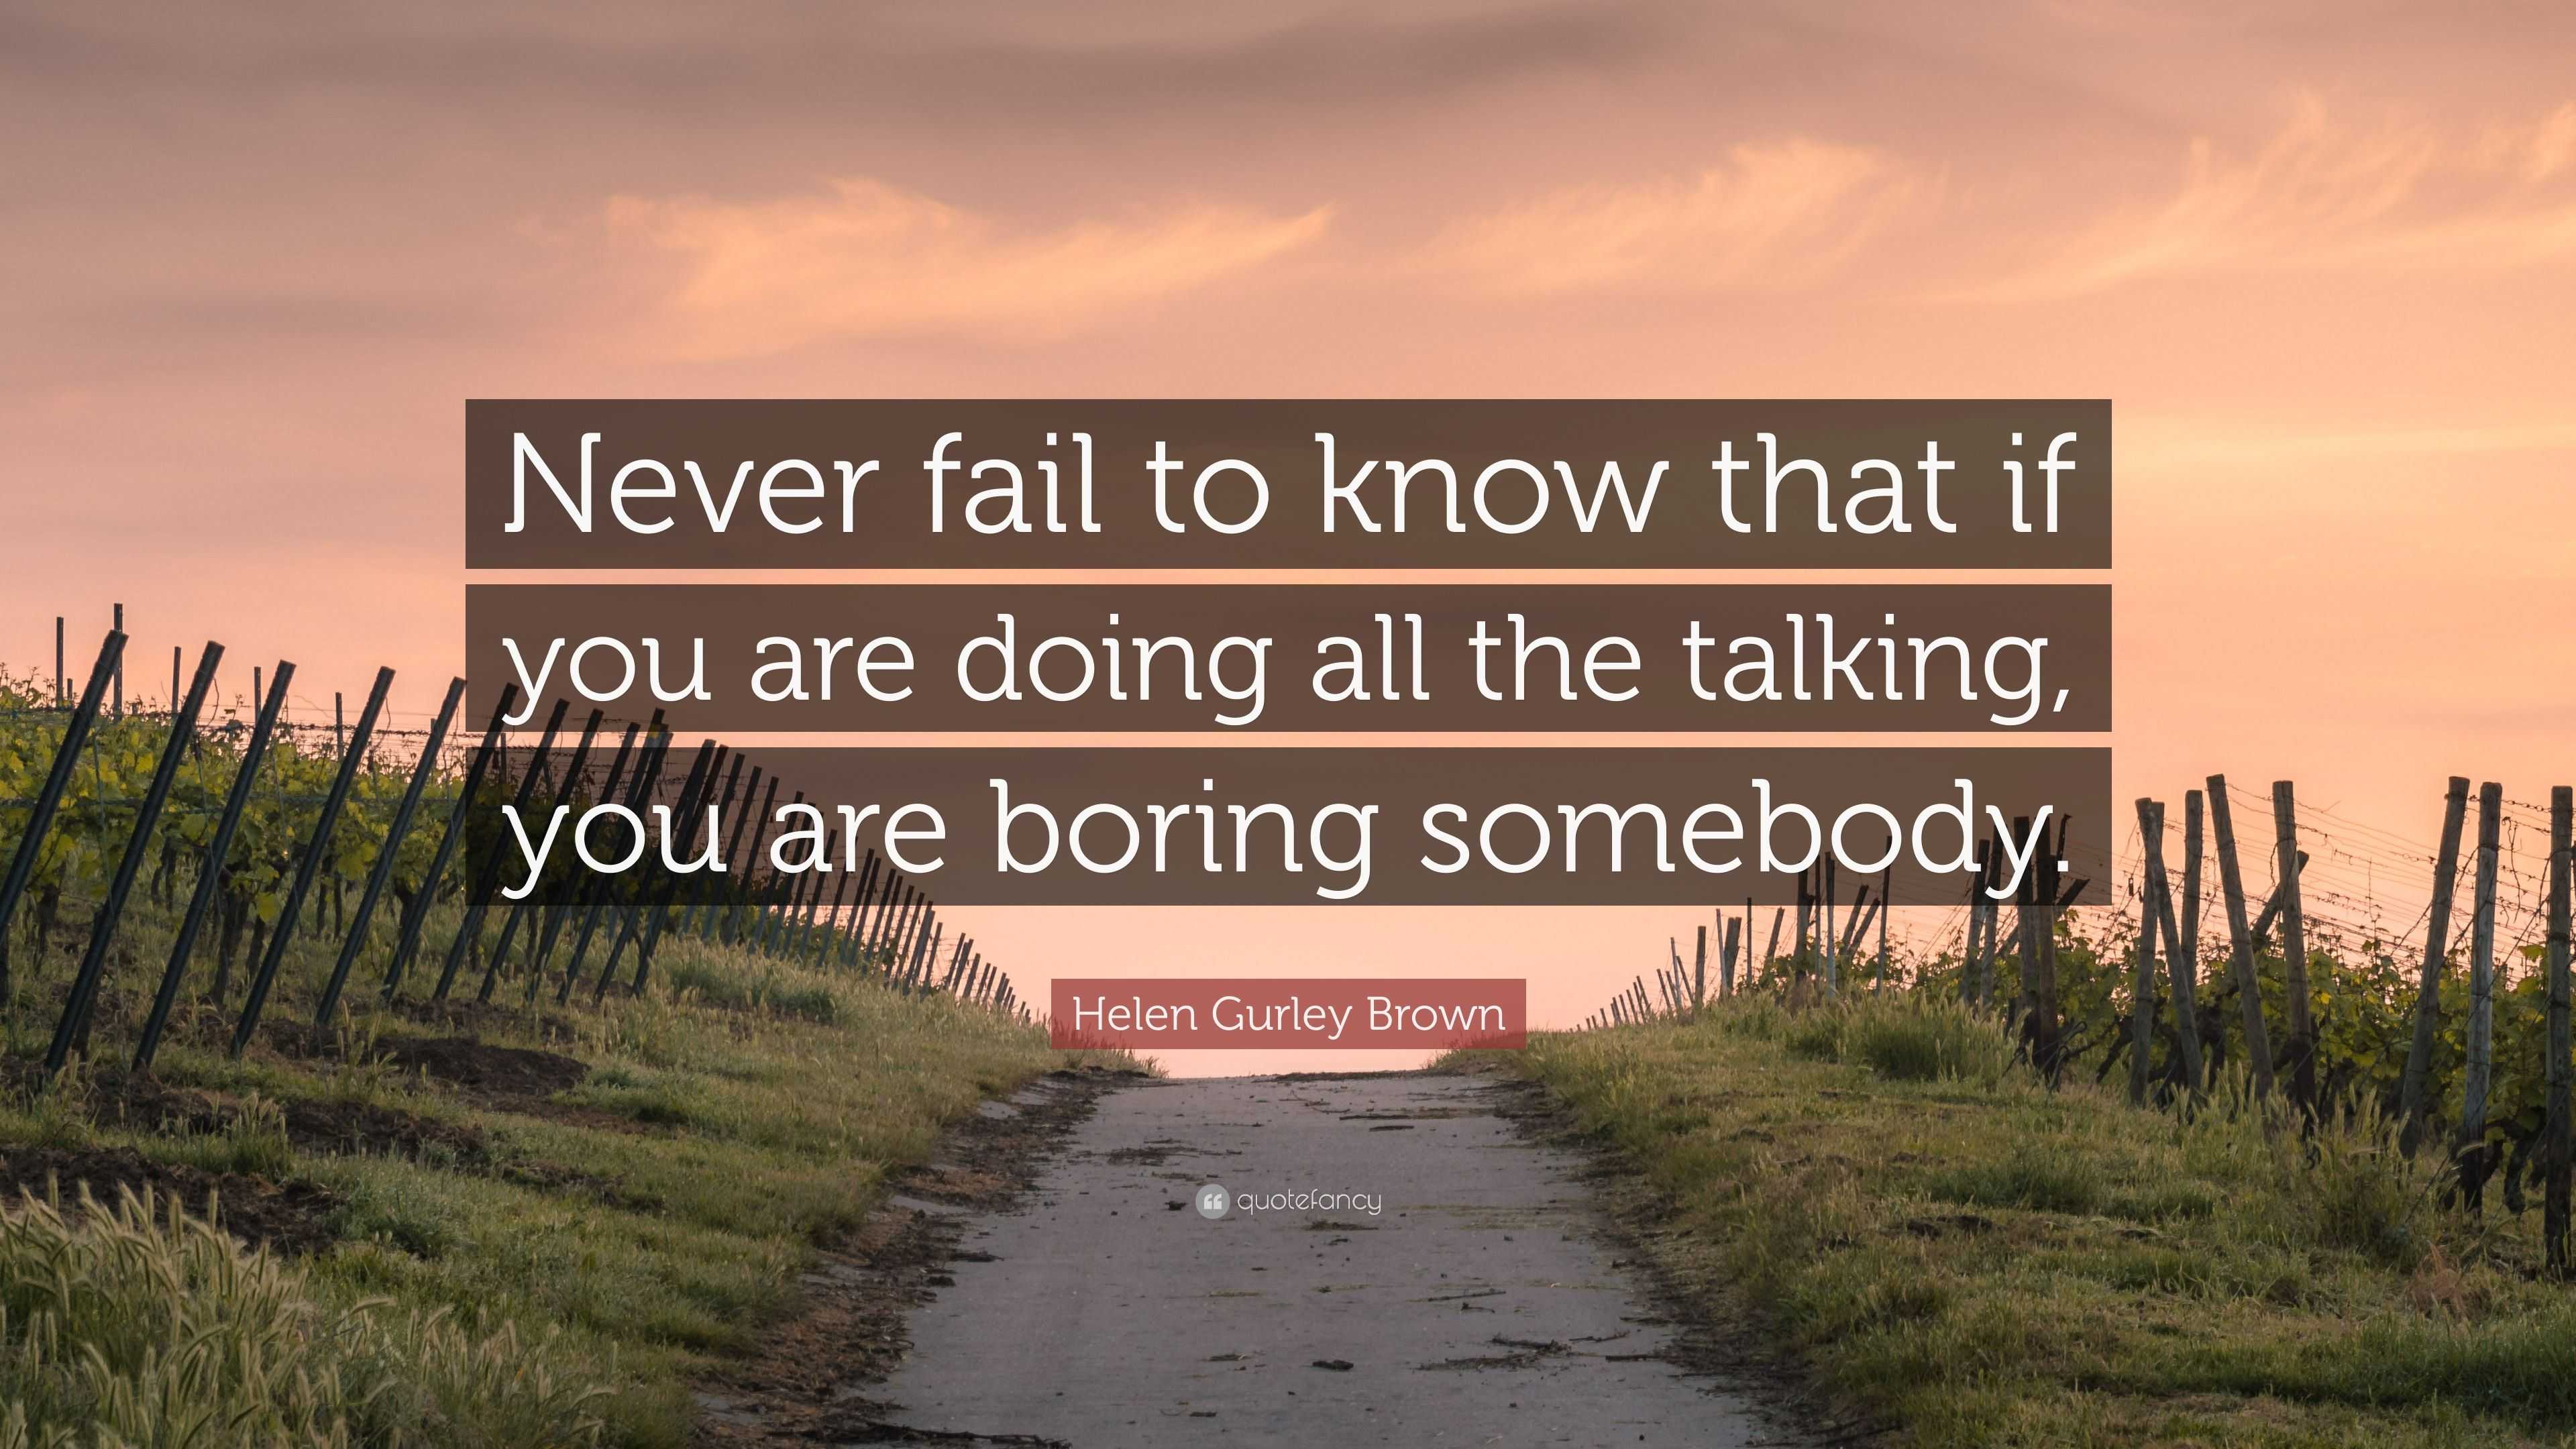 Helen Gurley Brown Quote “never Fail To Know That If You Are Doing All The Talking You Are